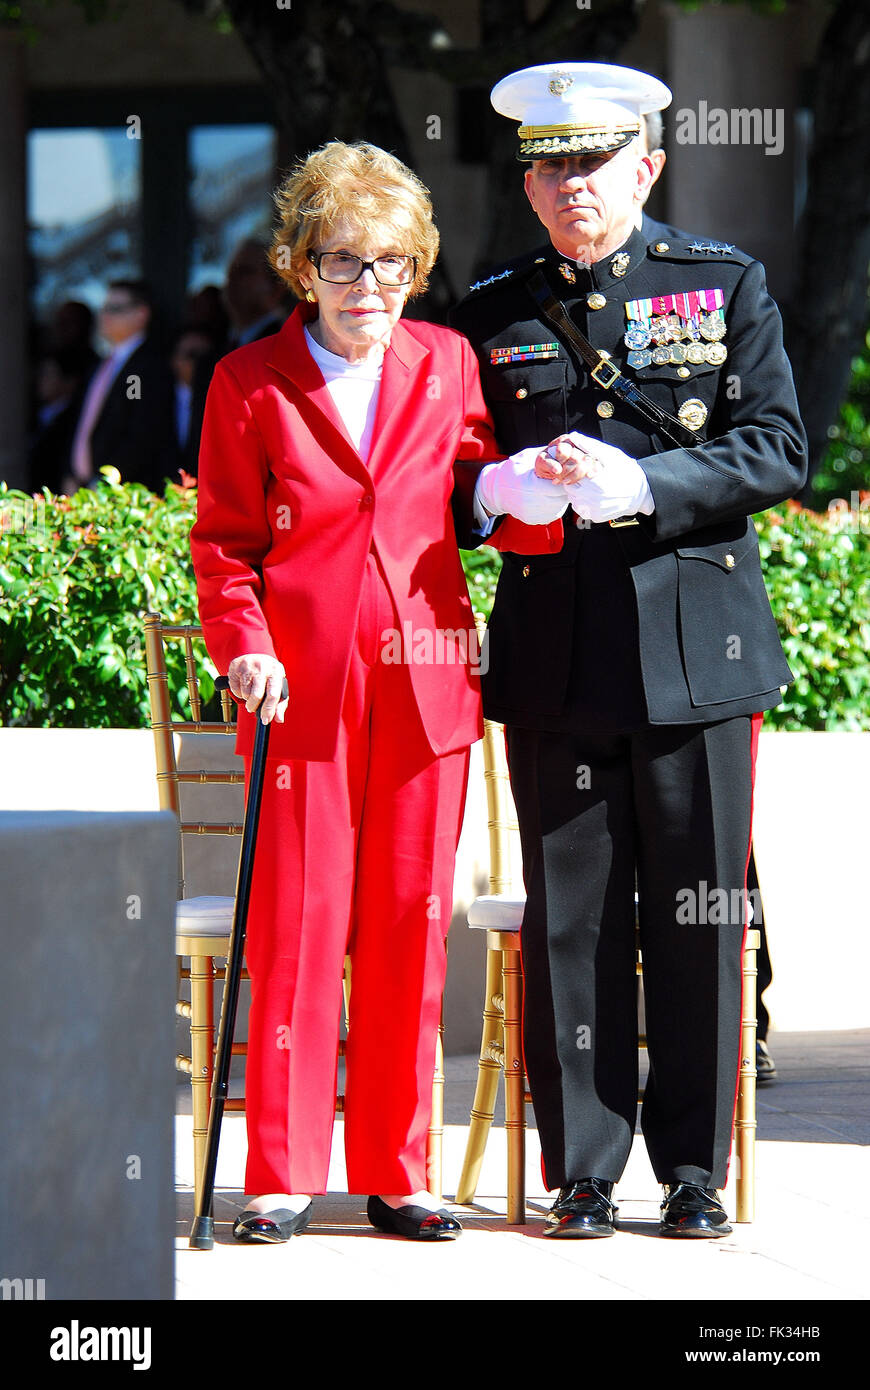 March 6, 2016 - NANCY REAGAN, Ronald Reagan's widow and First Lady from 1981-1989, has died at 94. The cause of death was congestive heart failure. Pictured: Feb. 6, 2011 - Simi Valley, California, U.S. - Former US first lady NANCY REAGAN is escorted by Marine Corps Lieutenant General GEORGE J. FLYNN at the memorial site which serves as her husband's final resting place to lay a wreath during the centennial birthday celebration for former US president Ronald Reagan at the Reagan Presidential Library. (Credit Image: © Valerie Nerres/ZUMAPRESS.com) Stock Photo